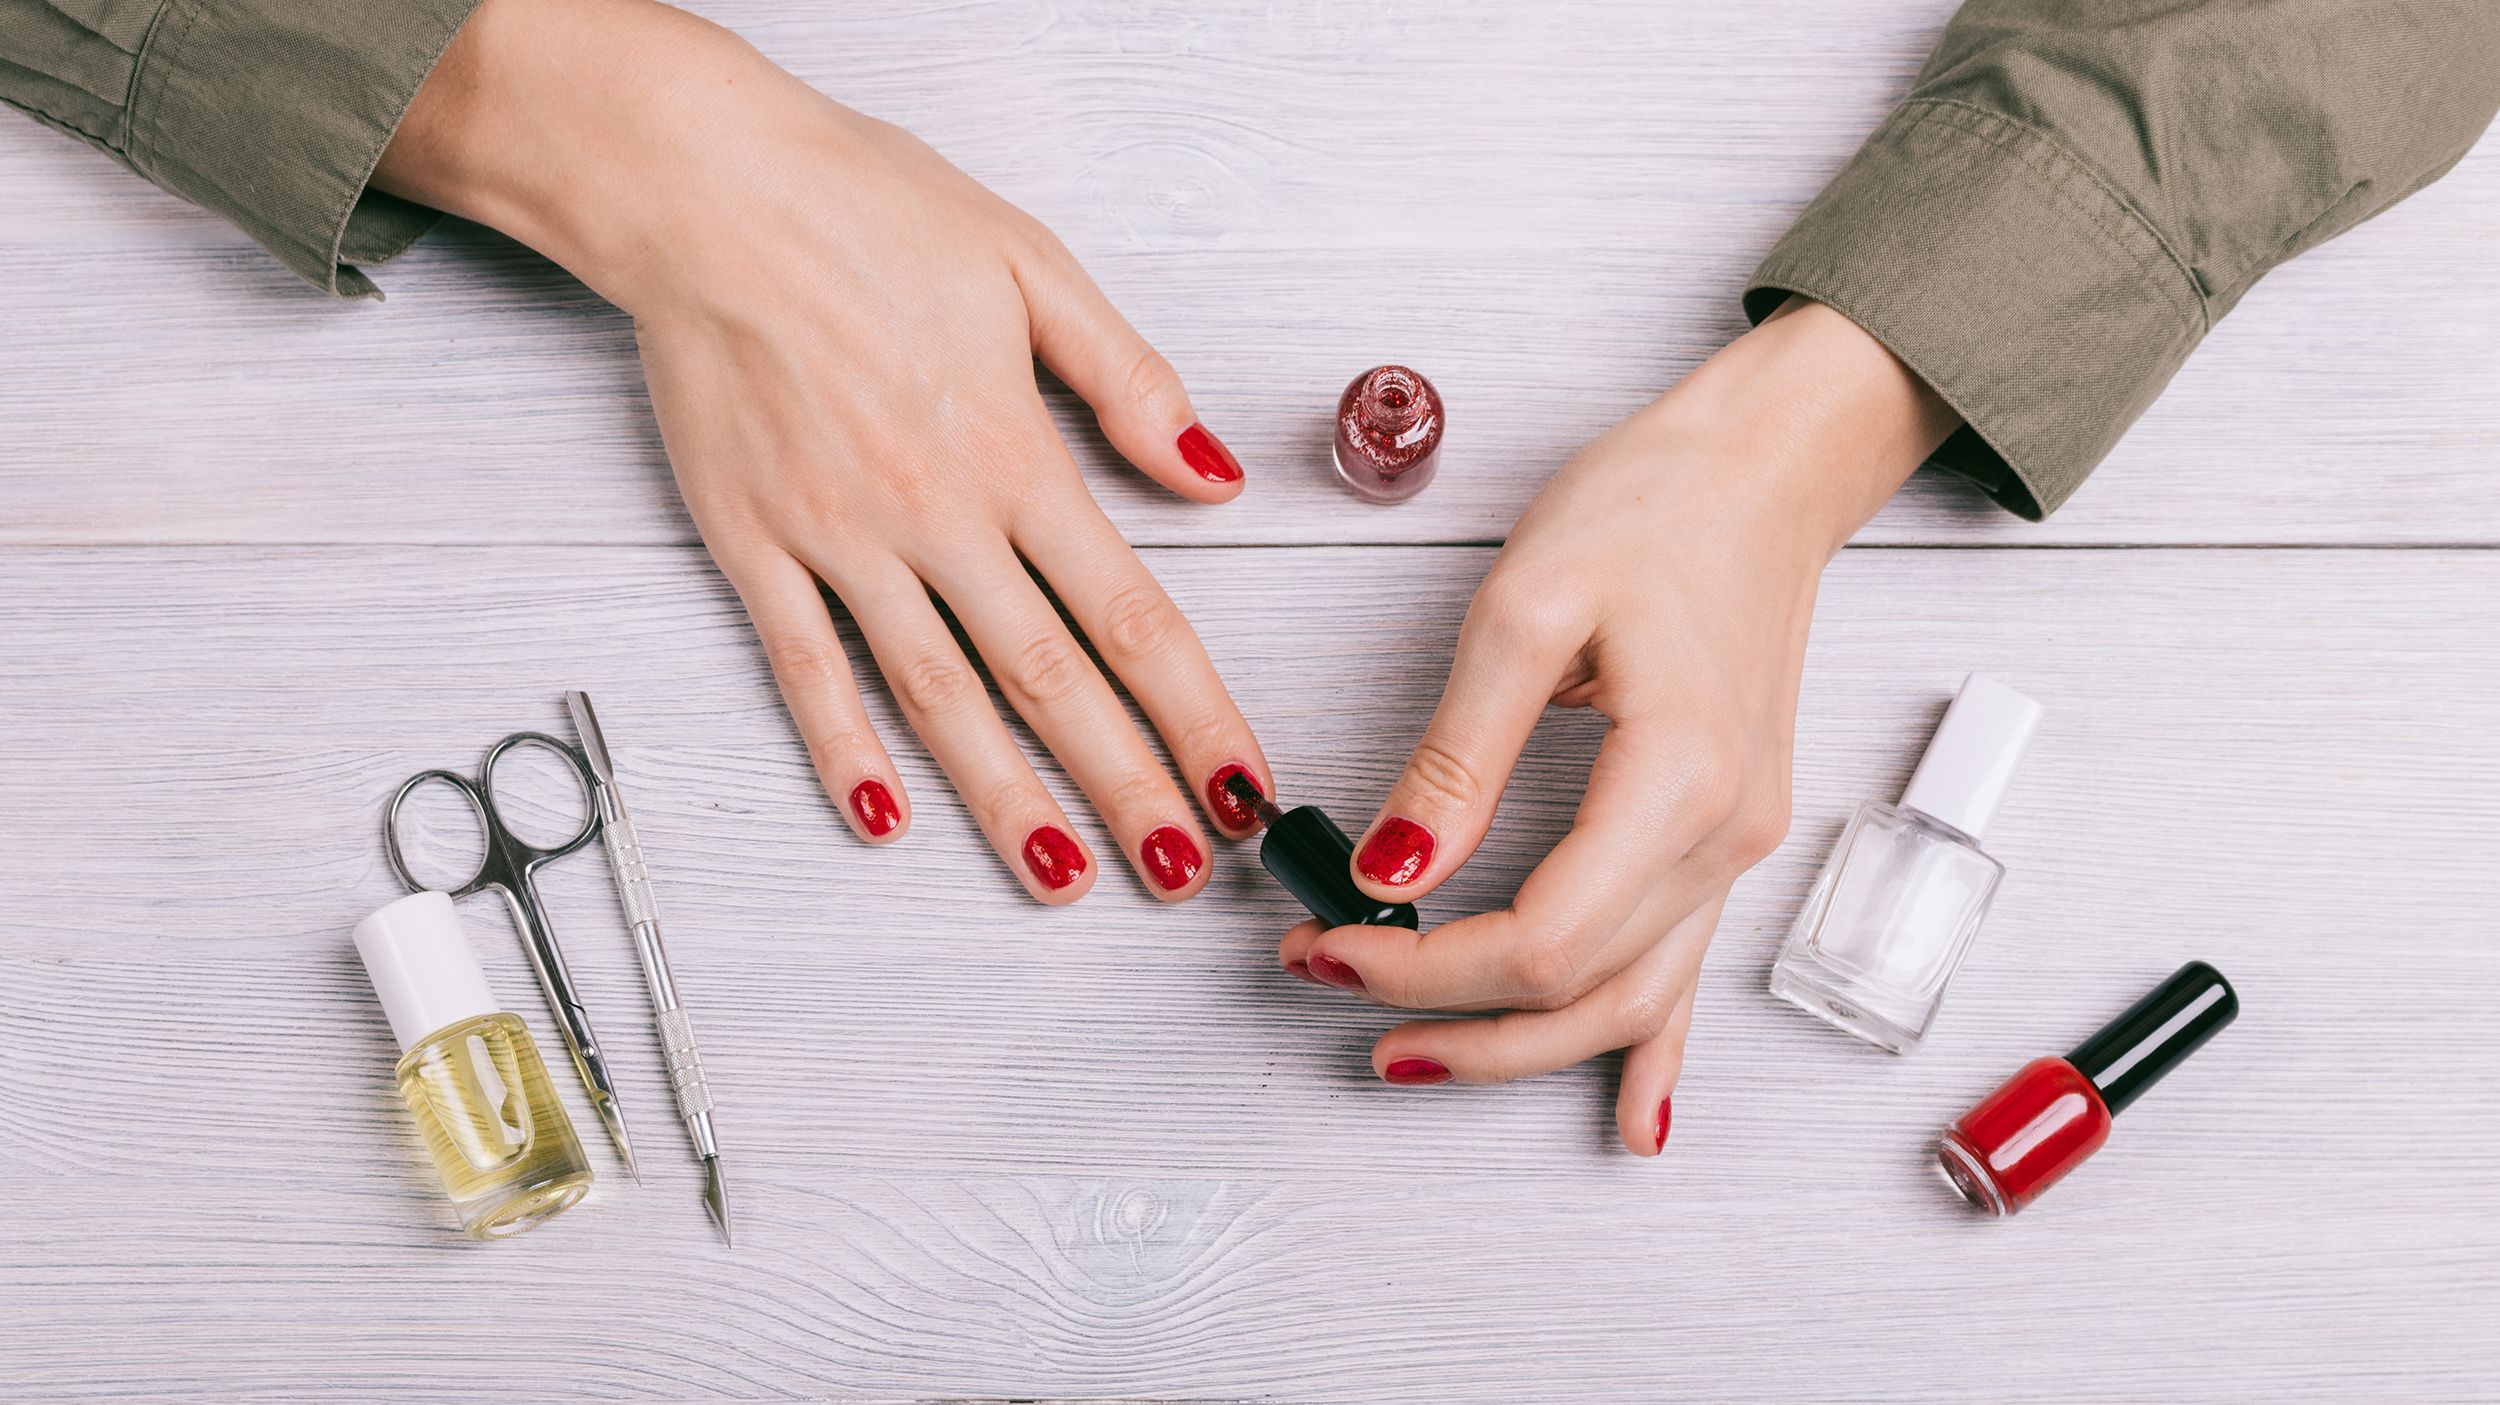 electrode Pile of stroke DIY Nails: Everything you need for a perfect at-home mani | CNN Underscored